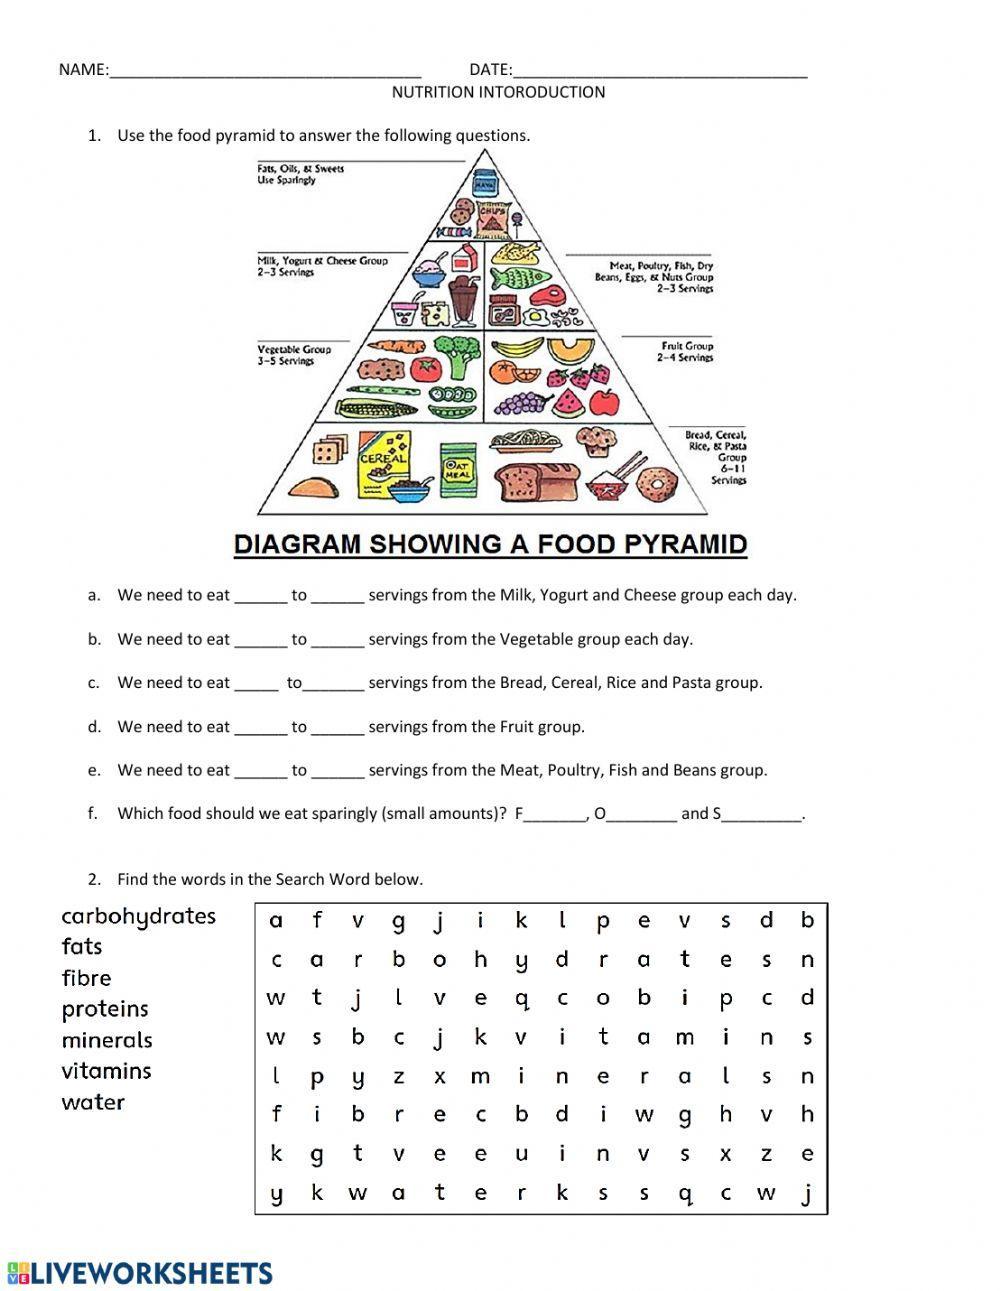 Nutrition introduction